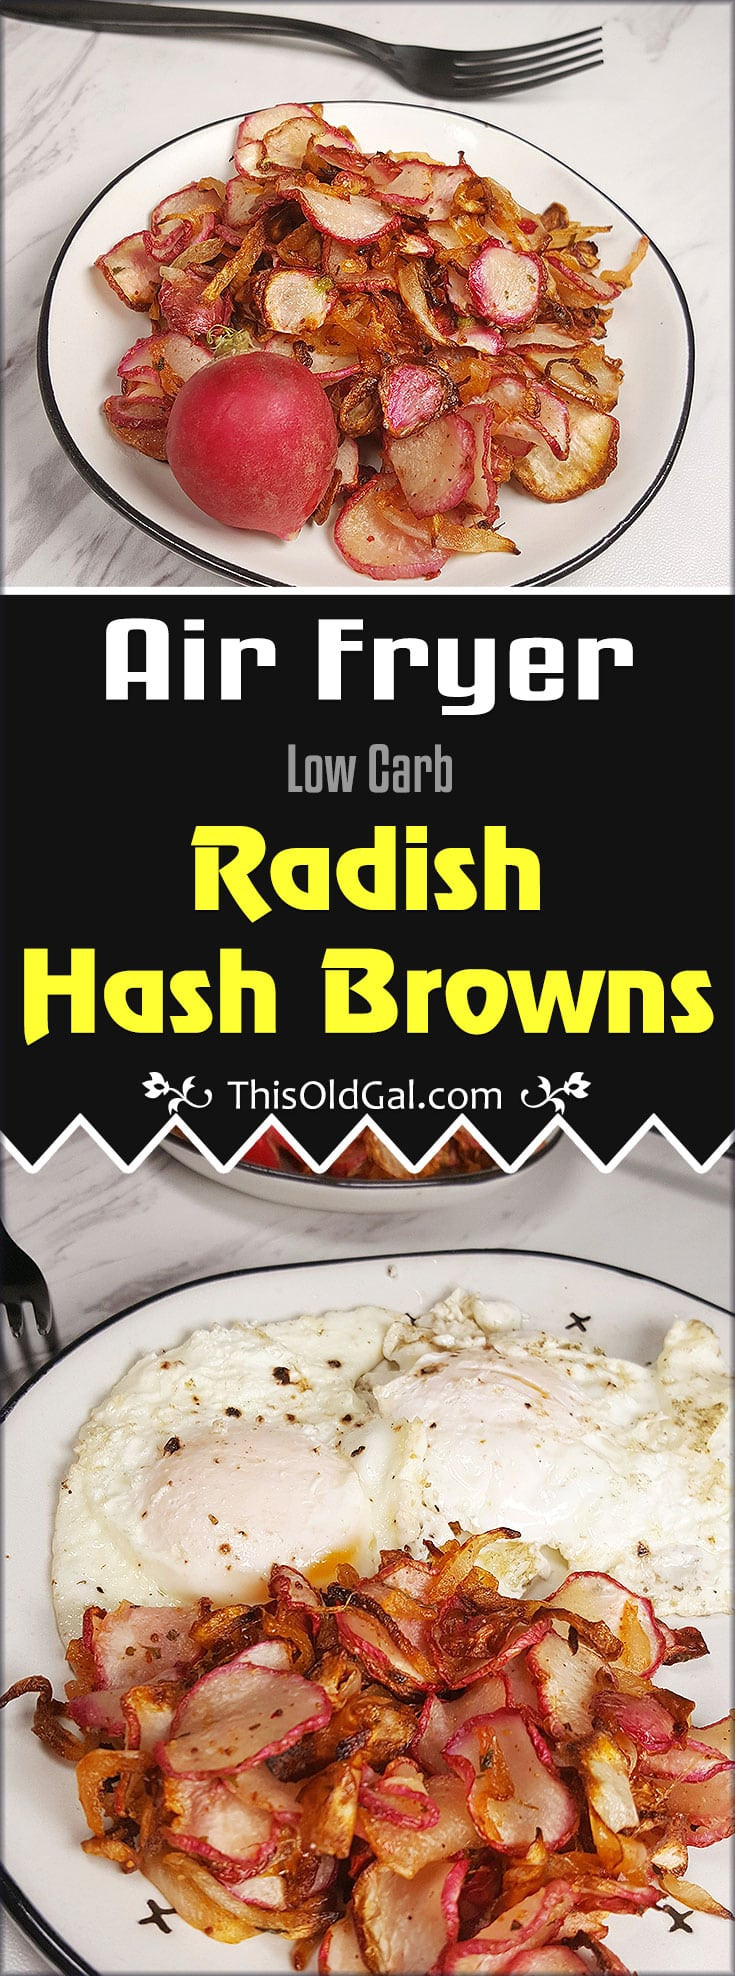 Air Fryer Low Carb Recipes
 Low Carb Air Fryer Radish Hash Browns Home Fries